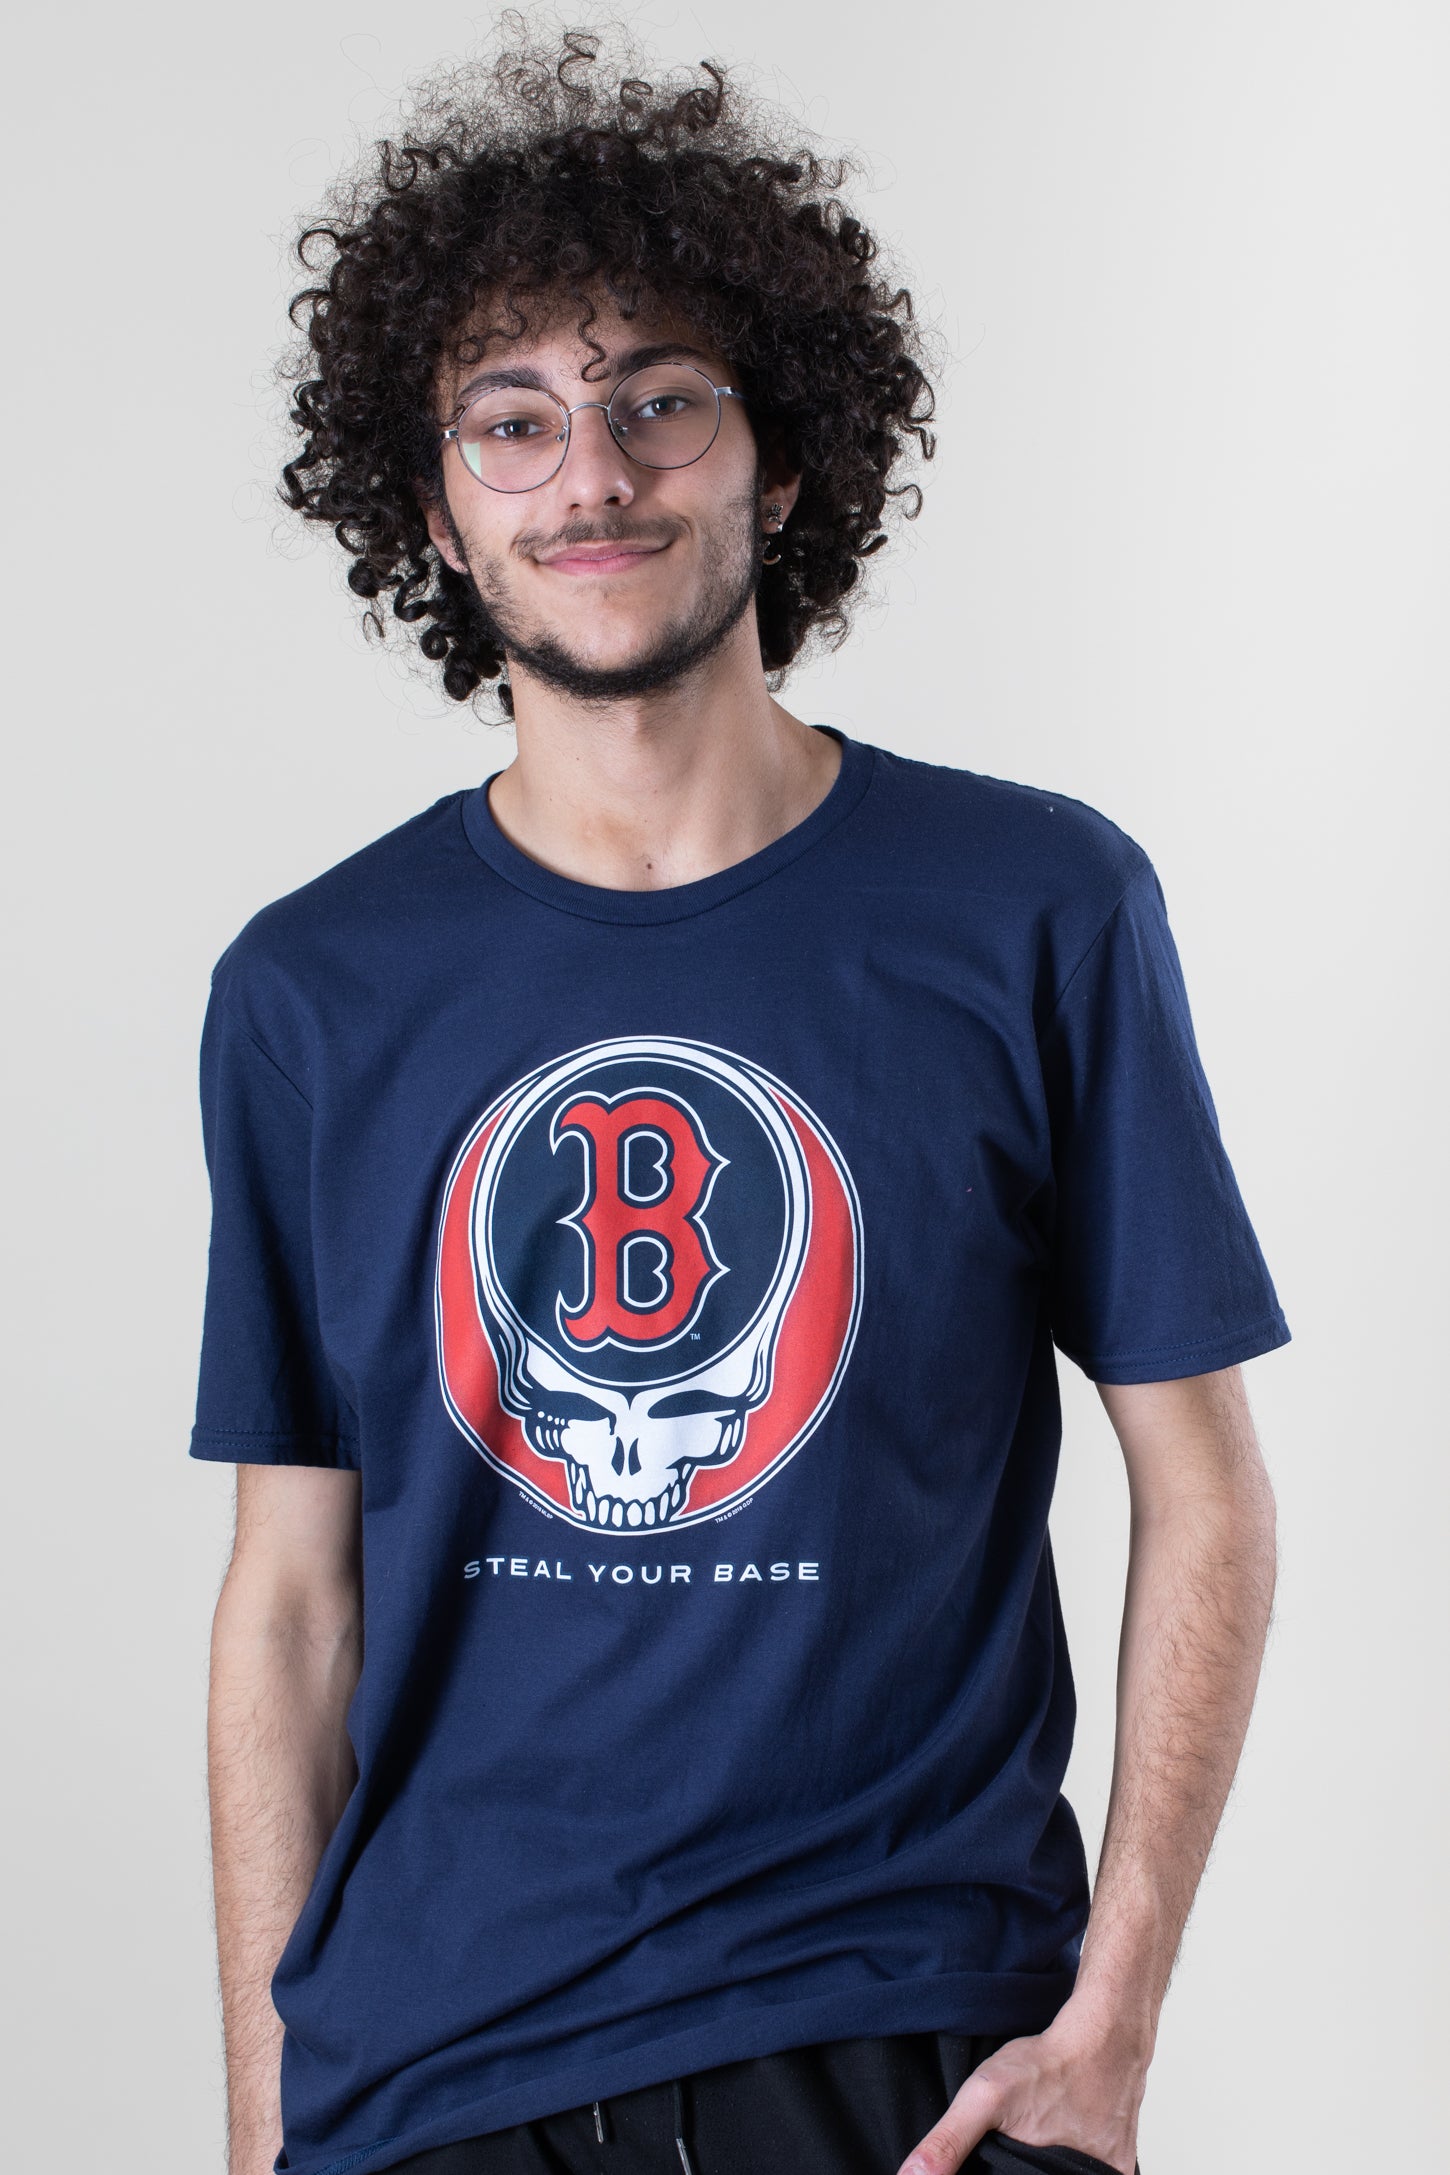 Red Sox Steal Your Base Grateful Dead T-Shirt